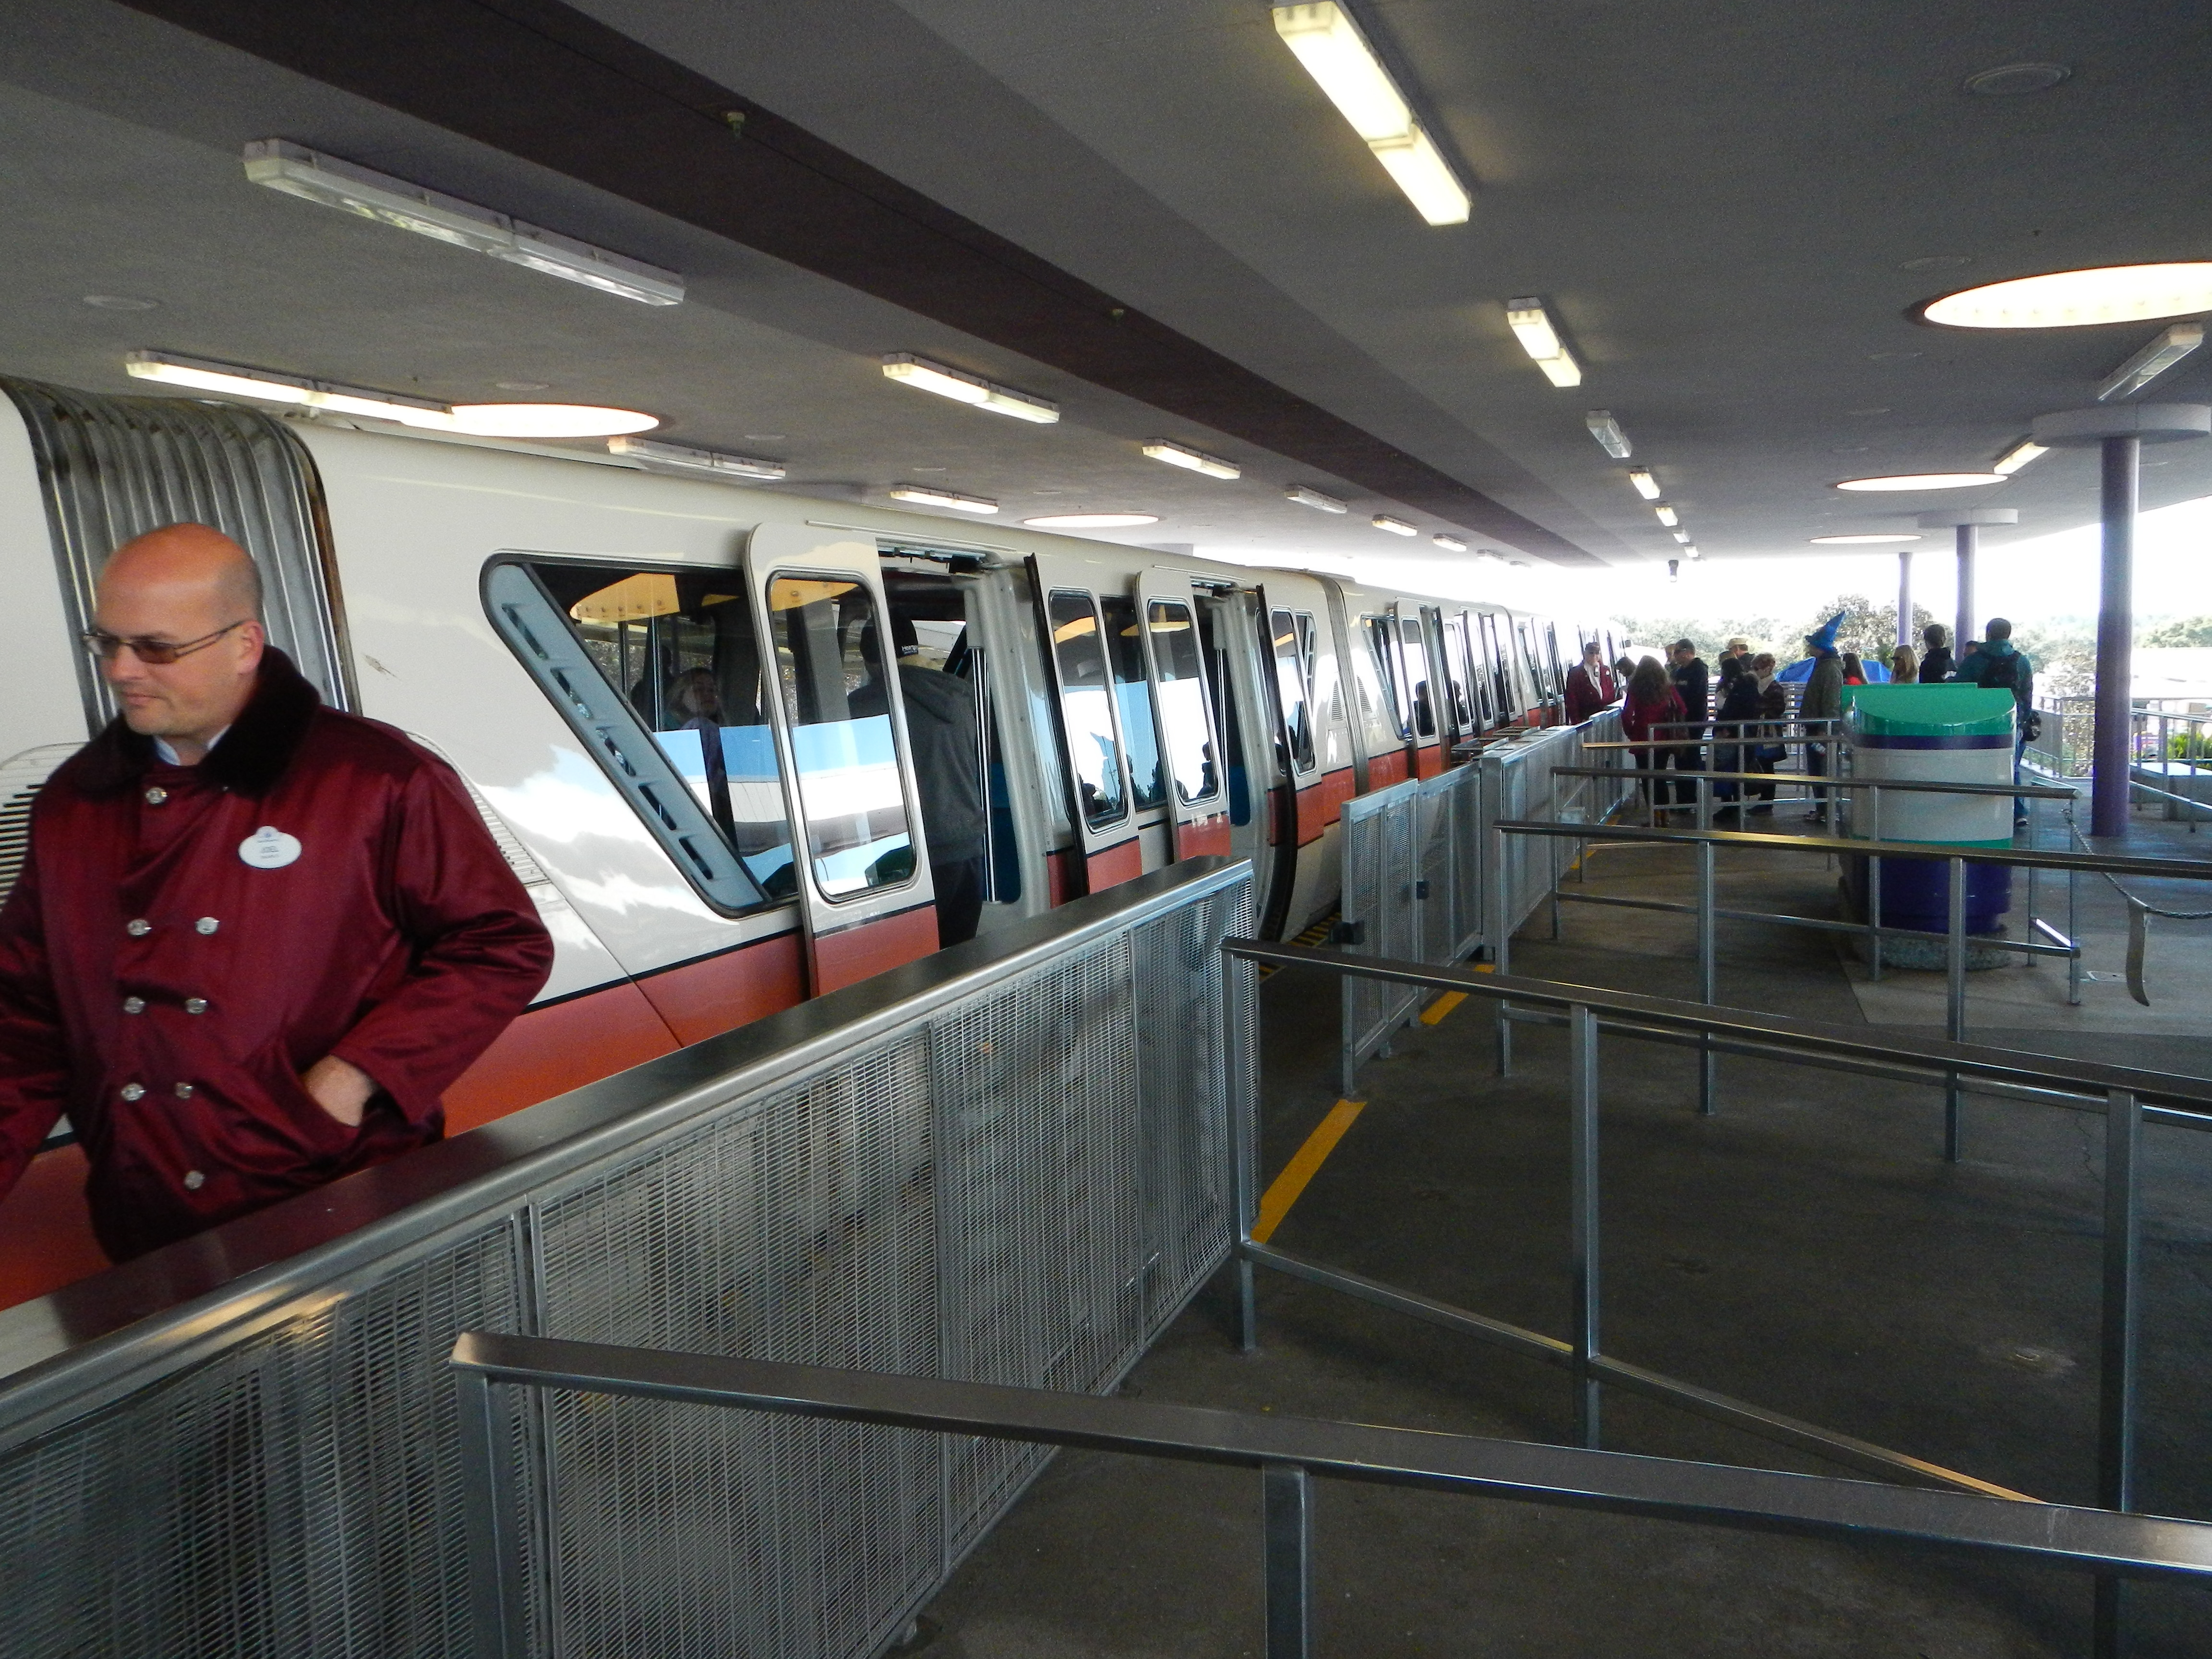 Monorail at Disney Transportation Center to Epcot